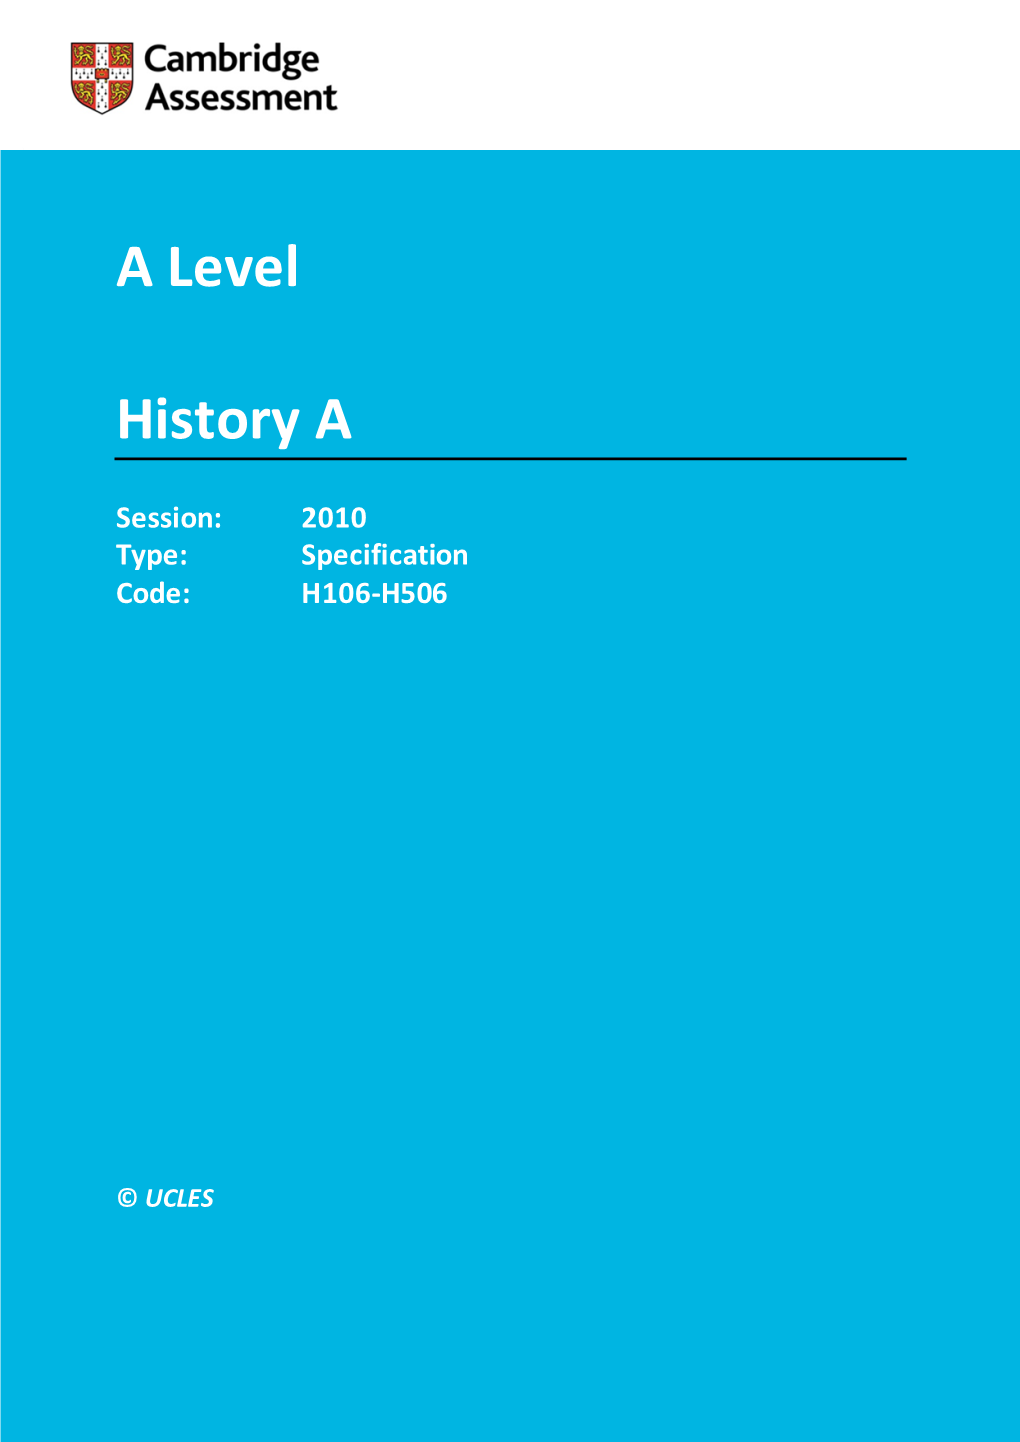 A Level History A